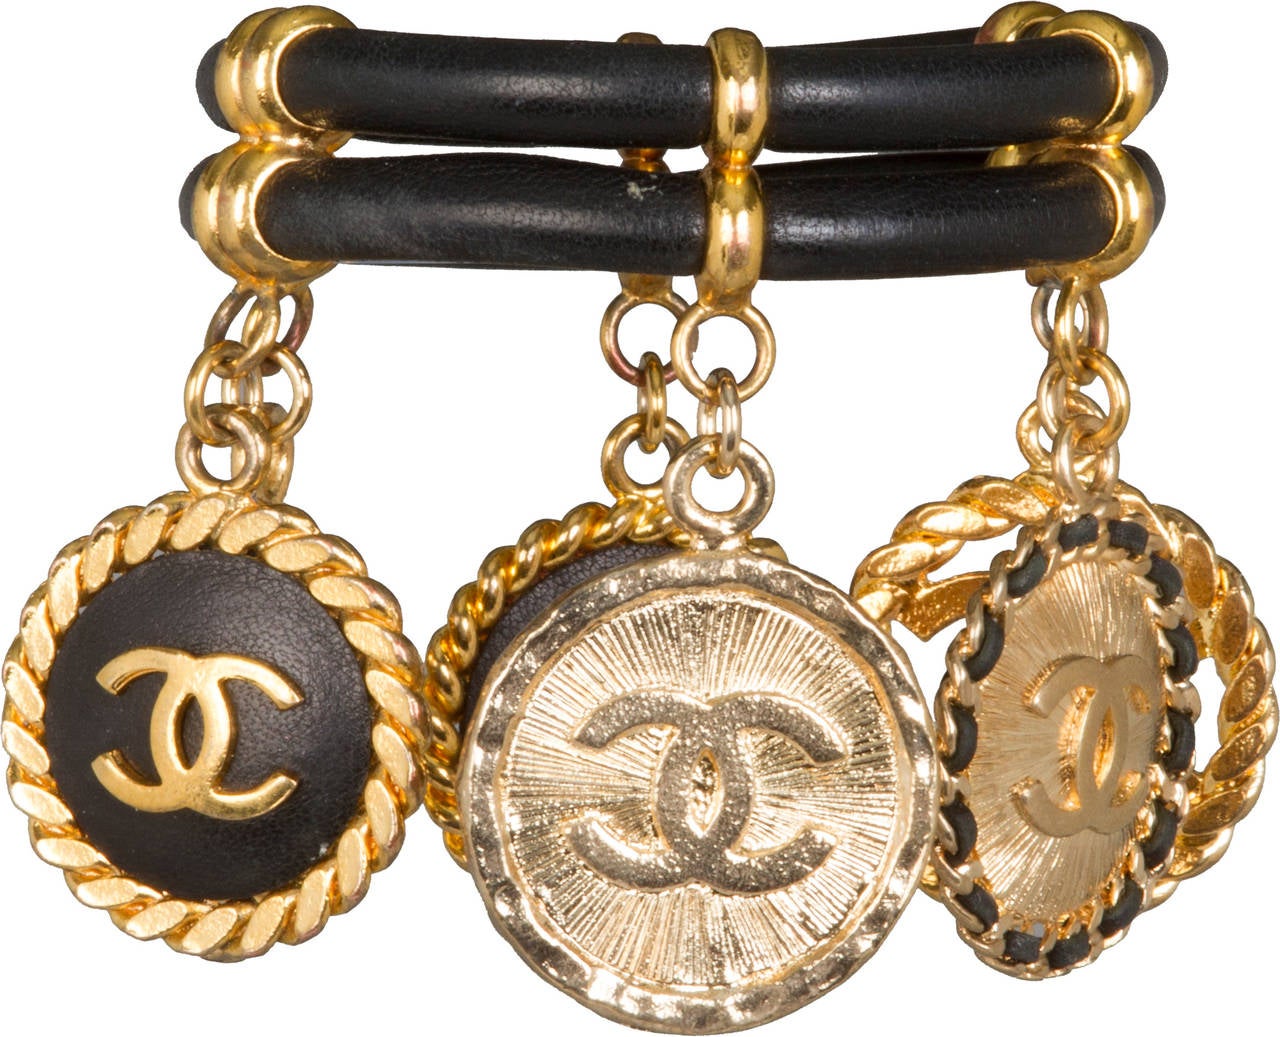 This rare  and fabulous bracelet has six variations of the CHANEL logo which hang from double black leather bands.

The internal circumference of the bracelet is 7.5